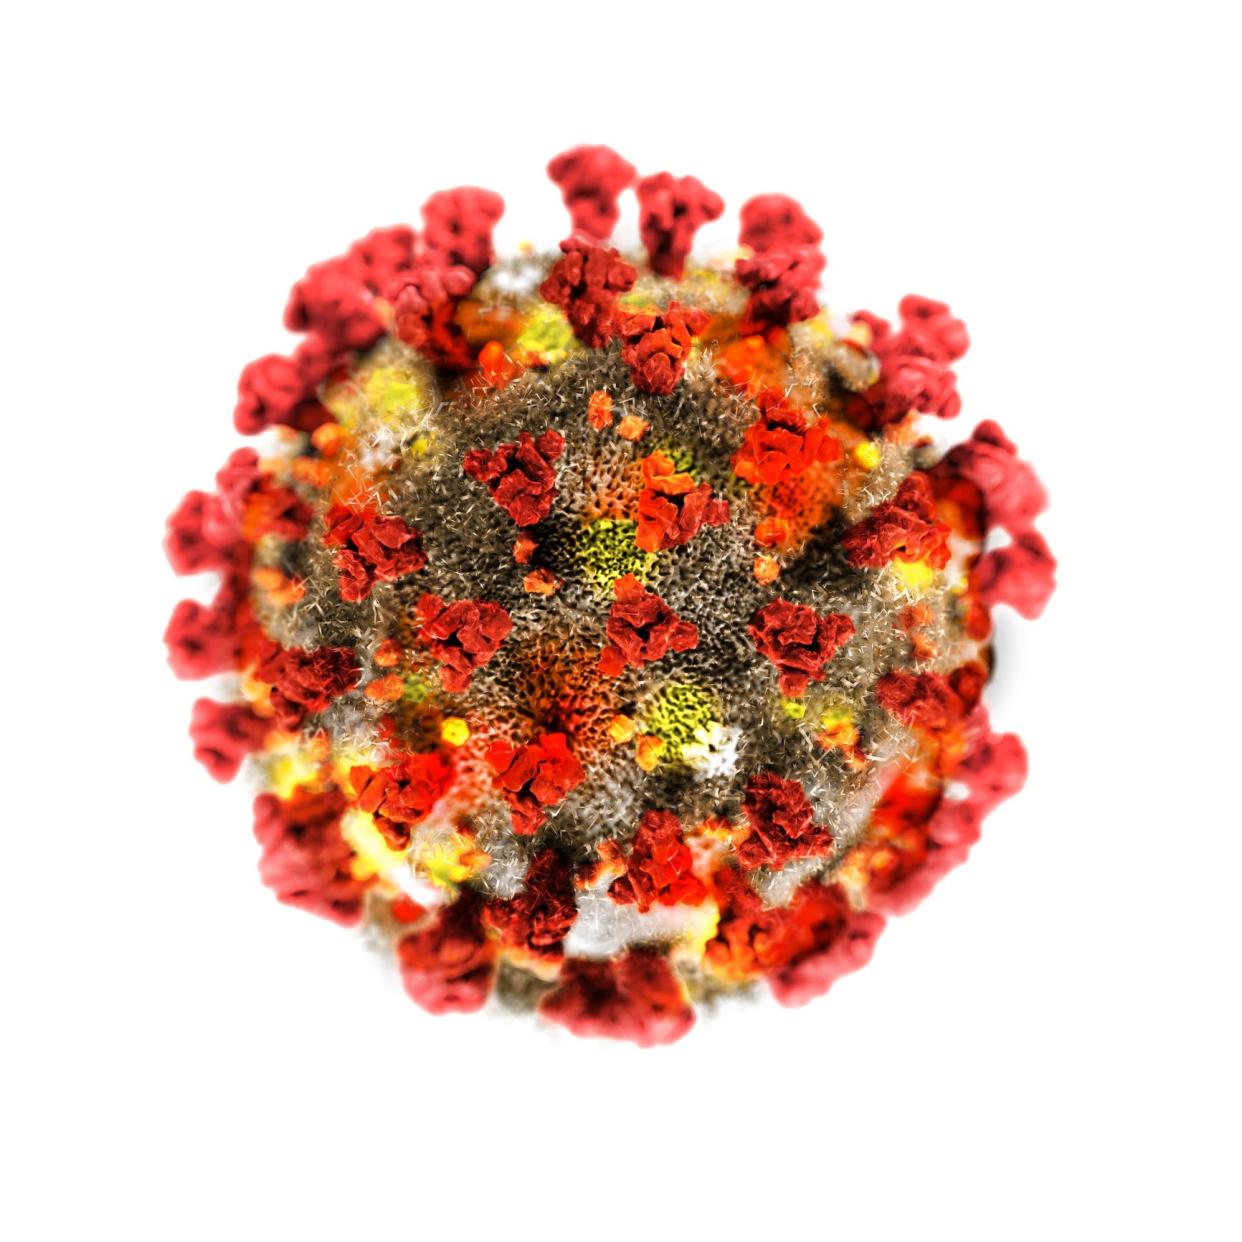 A close-up photo of the COVID-19 virus. A new variant of COVID-19, called FLiRT, was discovered in the U.S. back in March.